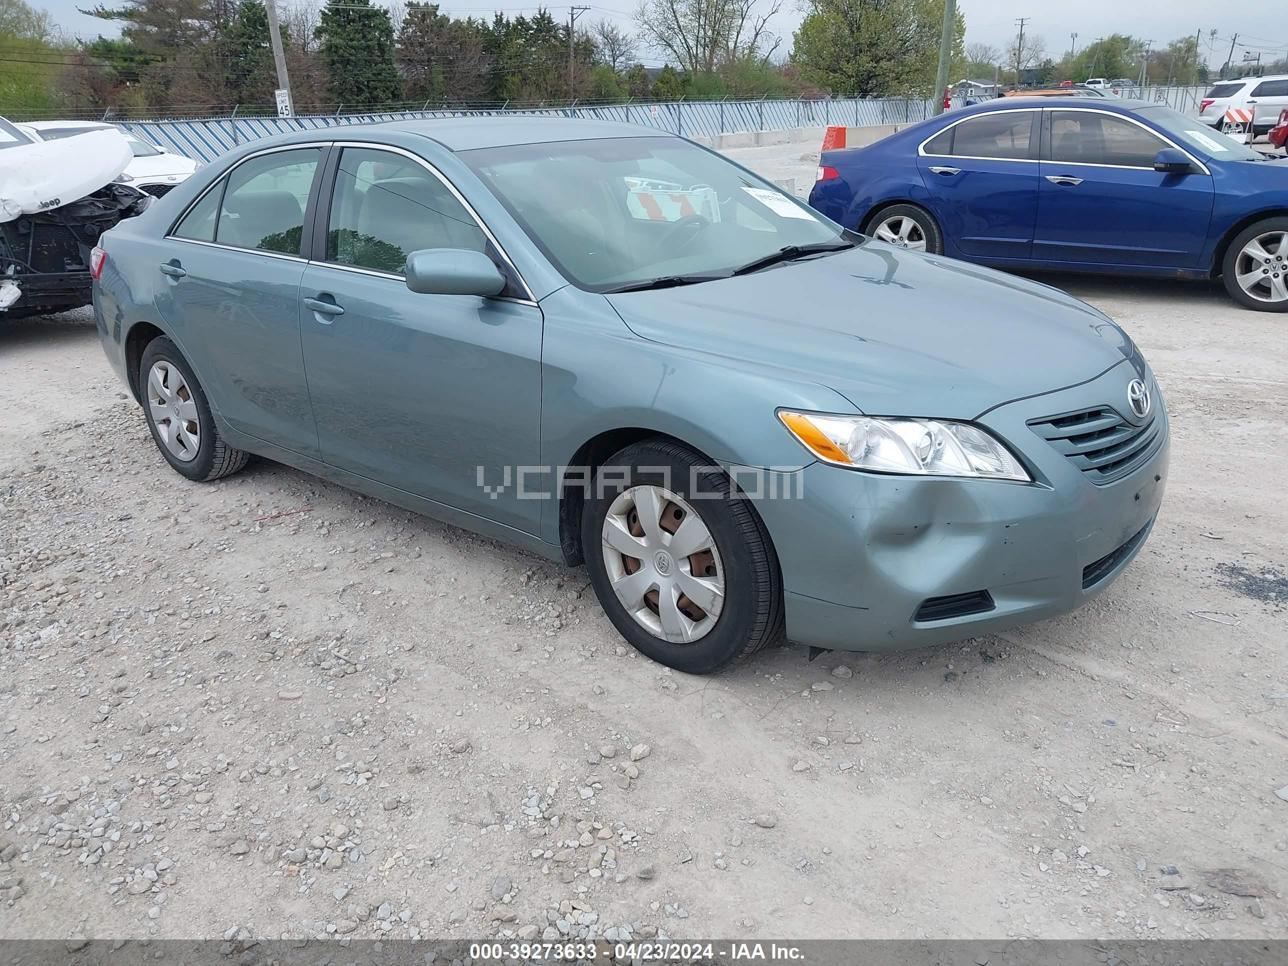 VIN: 4T4BE46K97R006216 - toyota camry